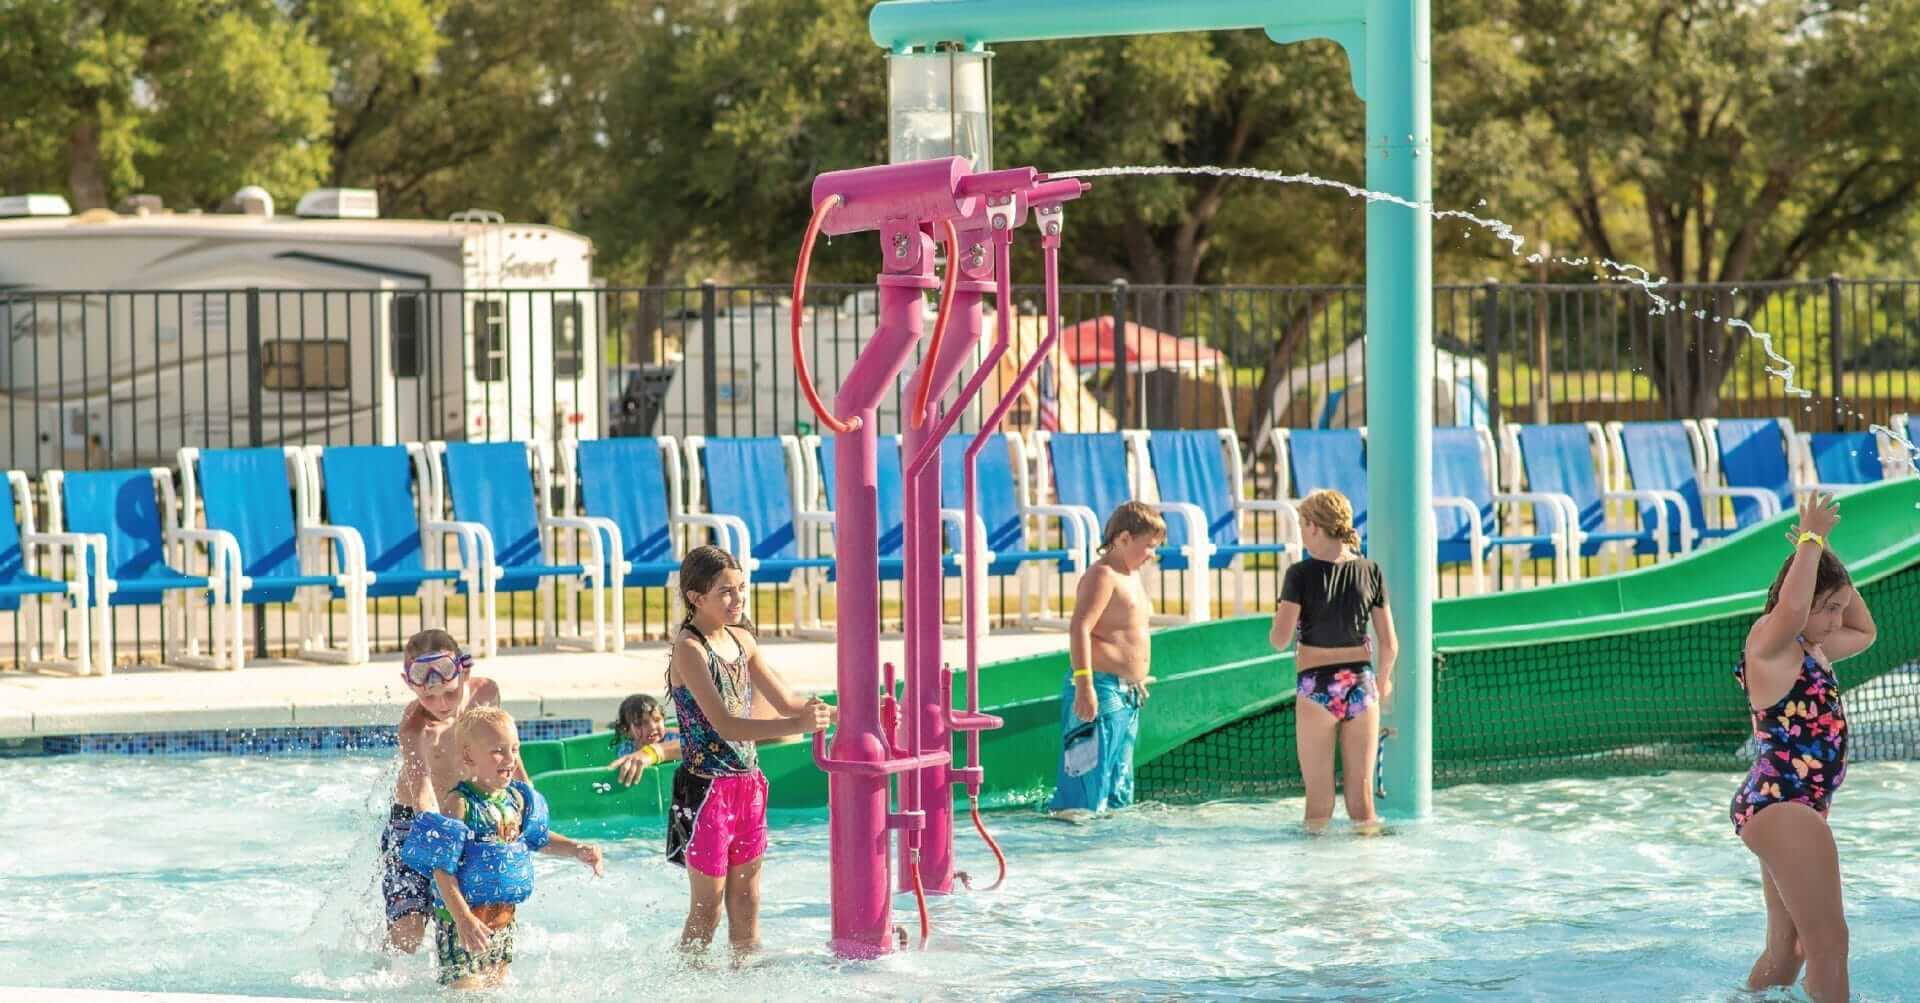 Kids play on the beanstalk blaster water toy by Interactive Play at the RV Park in Waller Texas.